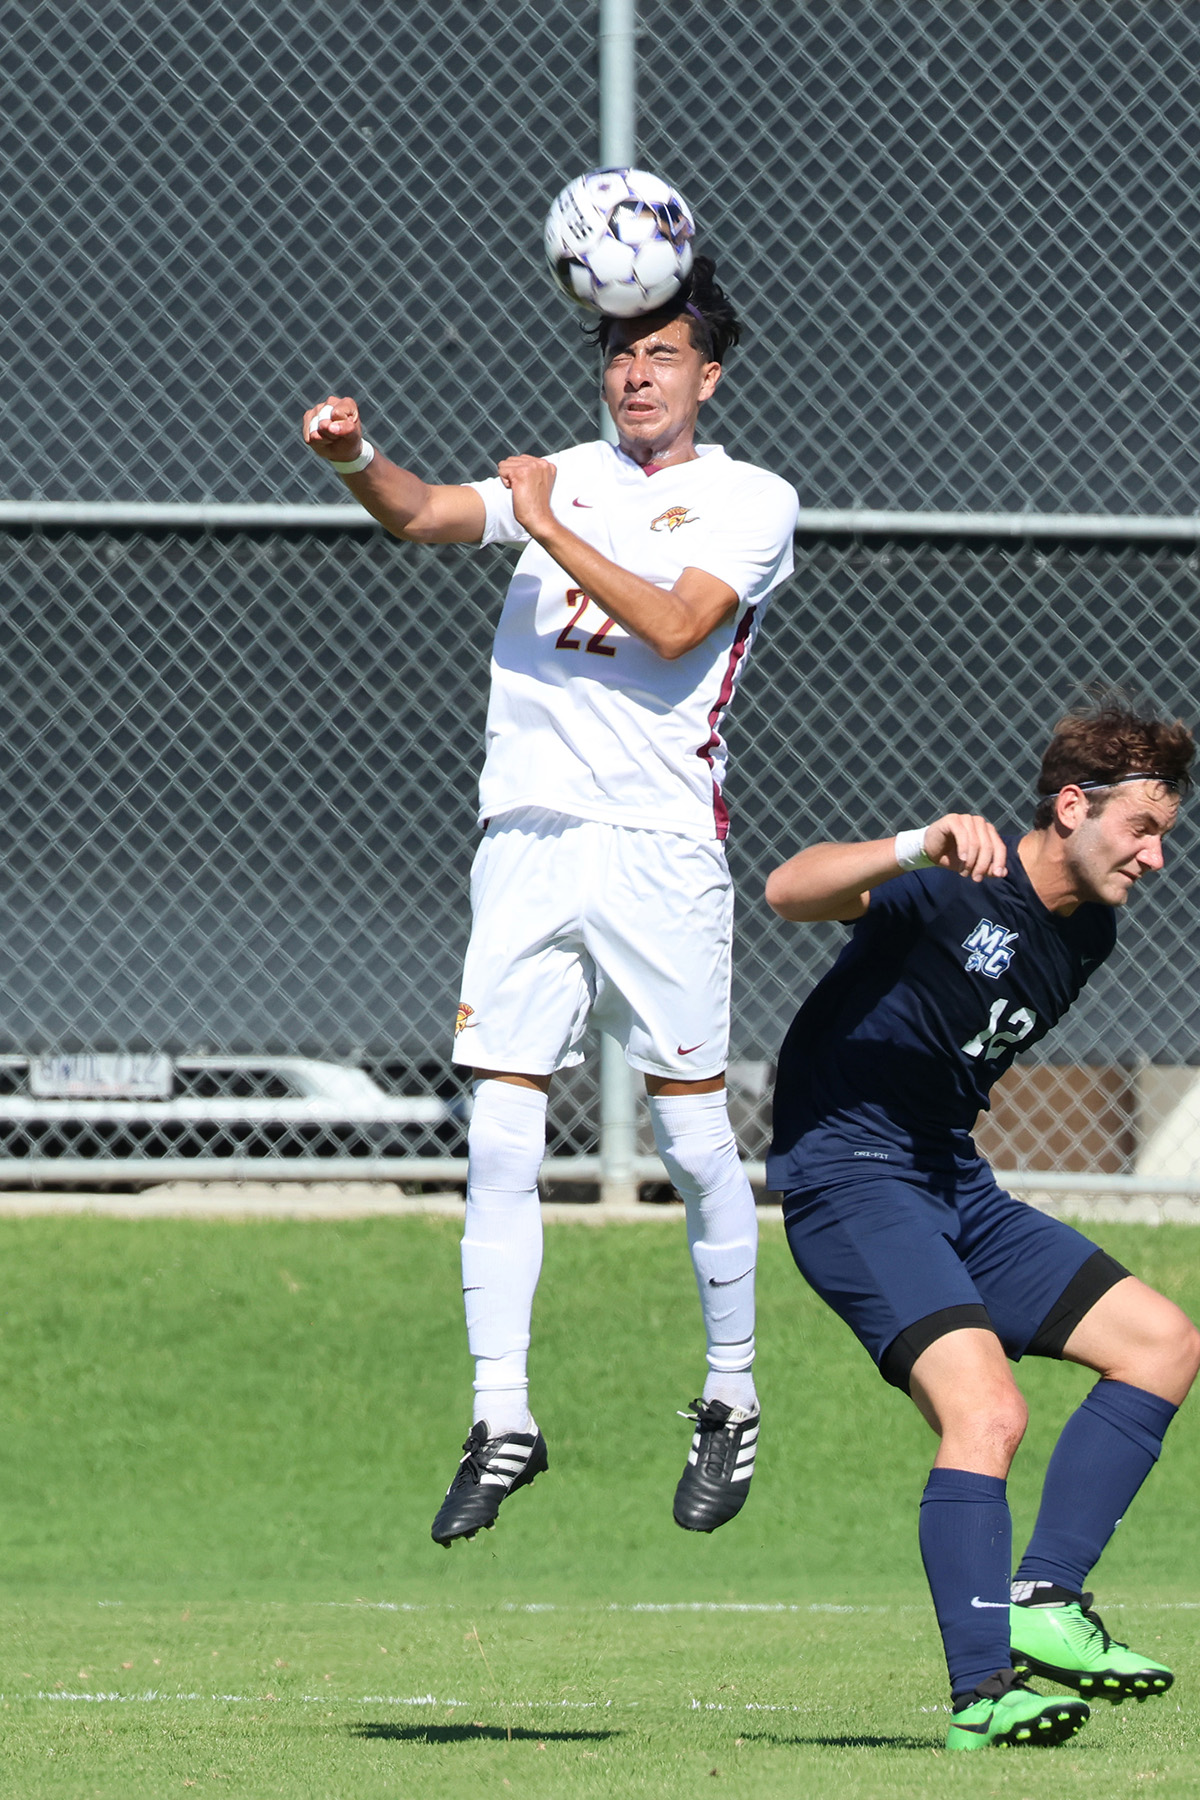 Angel Nolasco scored the only goal in PCC's 1-0 win at Victor Valley on Tuesday (photo by Richard Quinton).